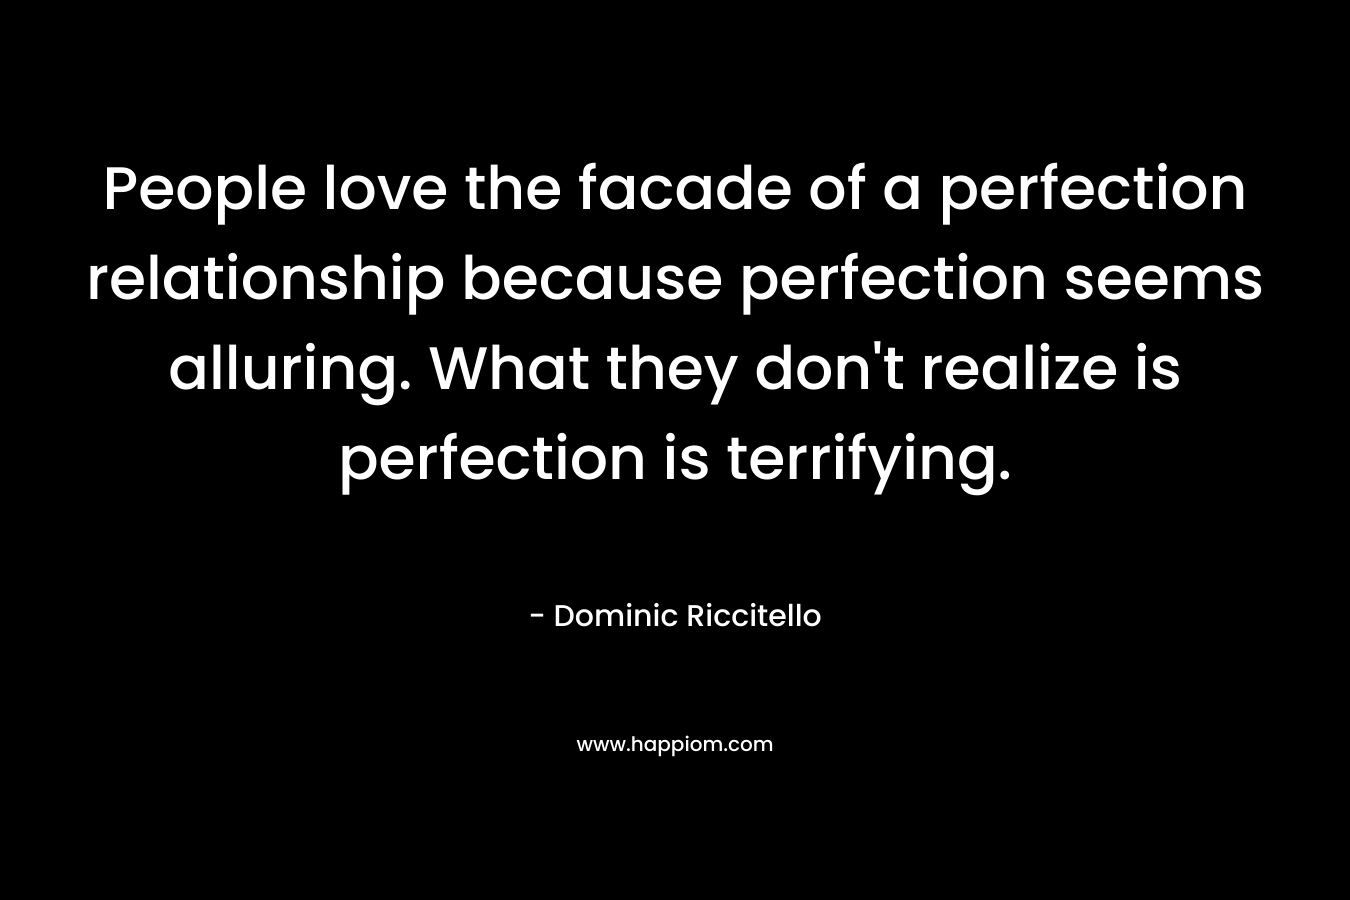 People love the facade of a perfection relationship because perfection seems alluring. What they don’t realize is perfection is terrifying. – Dominic Riccitello